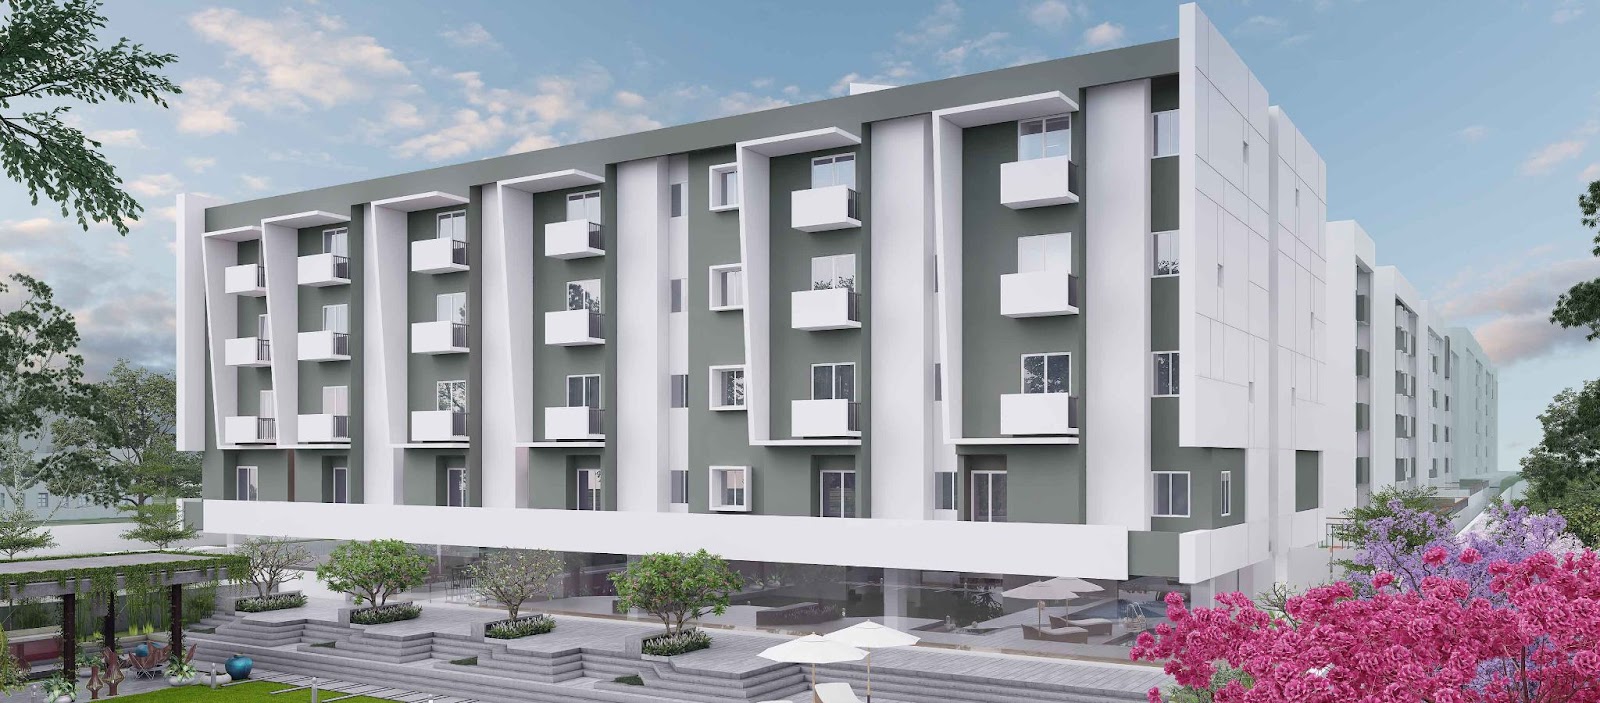 GRC Subhiksha offers Premium Ready to Move Apartments in Sarjapur Road Bangalore. Book 2 & 3 BHK Flats for Sale Sarjapur Road from top builders in Bangalore
